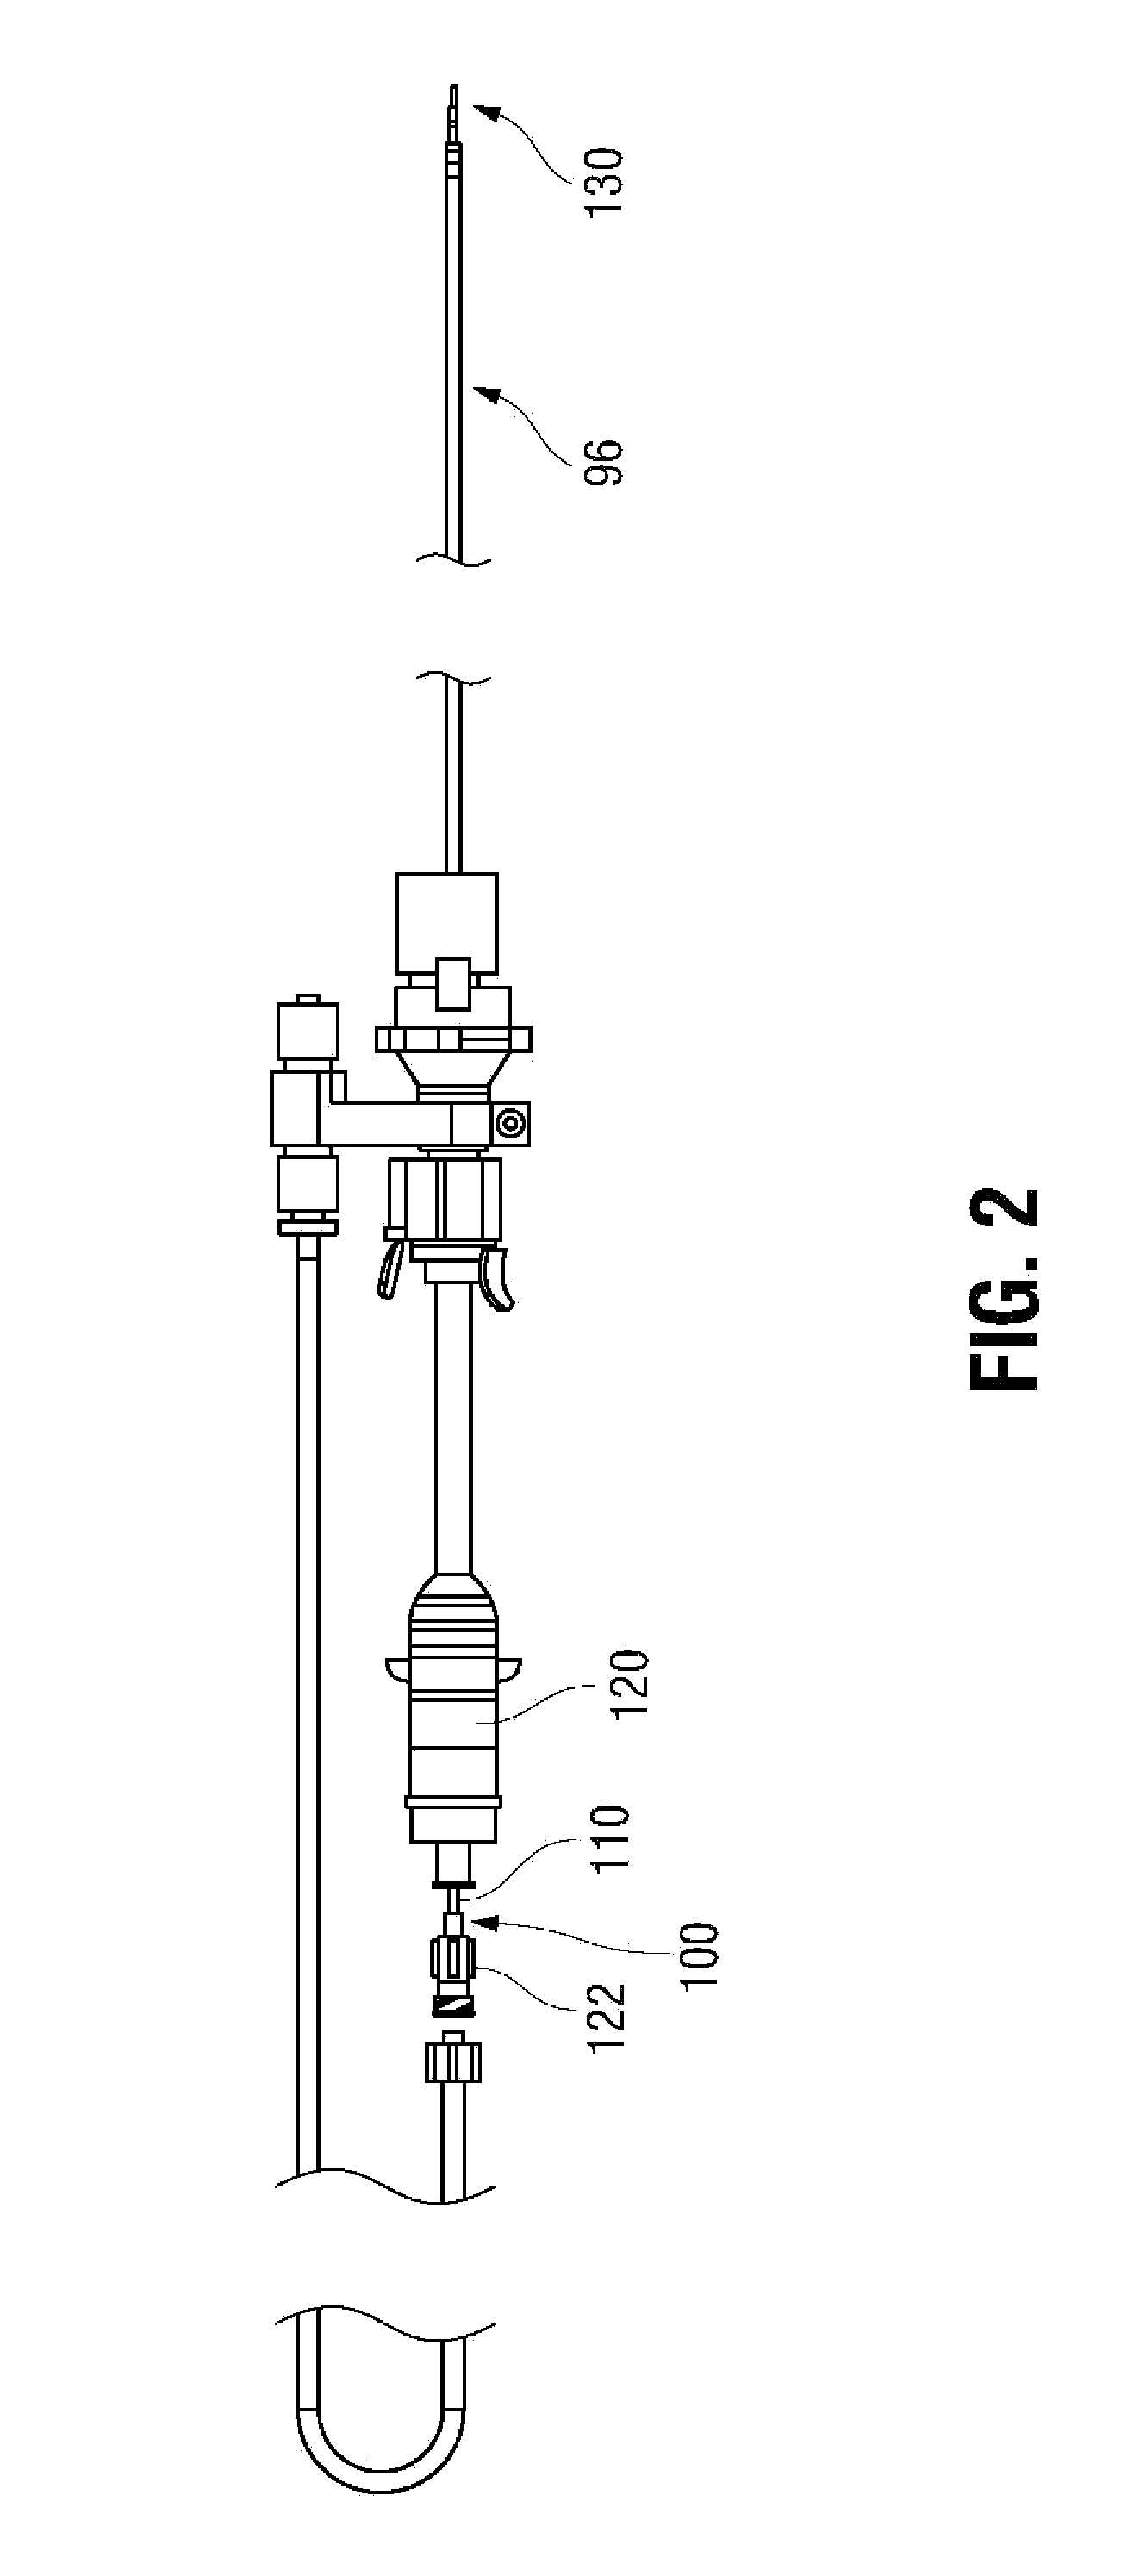 Devices, systems, and methods for navigating a biopsy tool to a target location and obtaining a tissue sample using the same